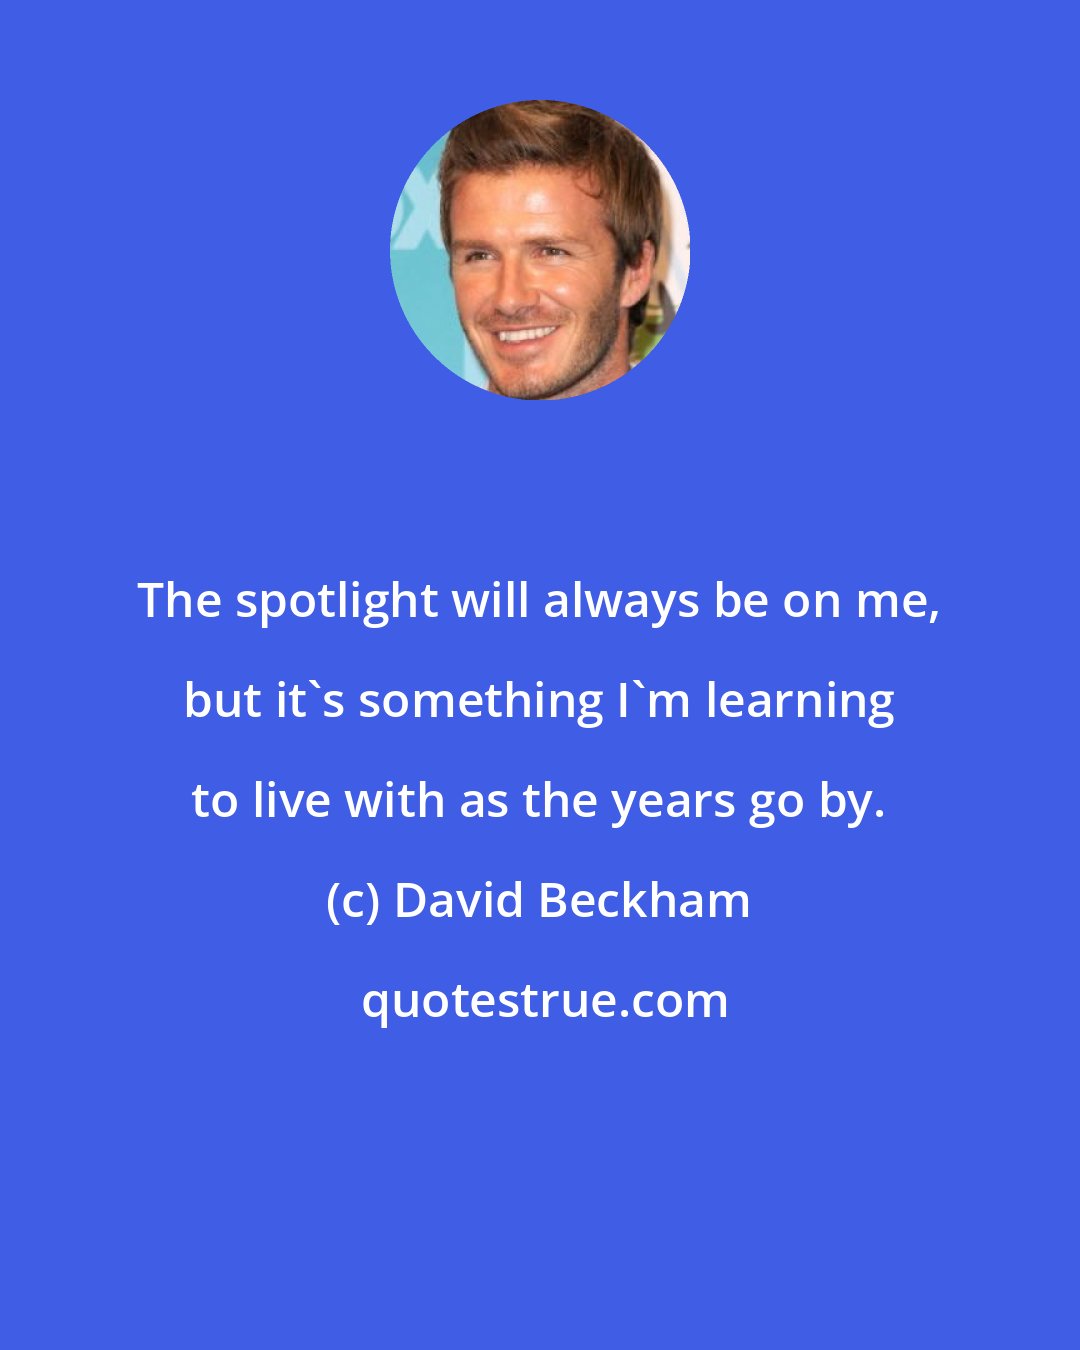 David Beckham: The spotlight will always be on me, but it's something I'm learning to live with as the years go by.